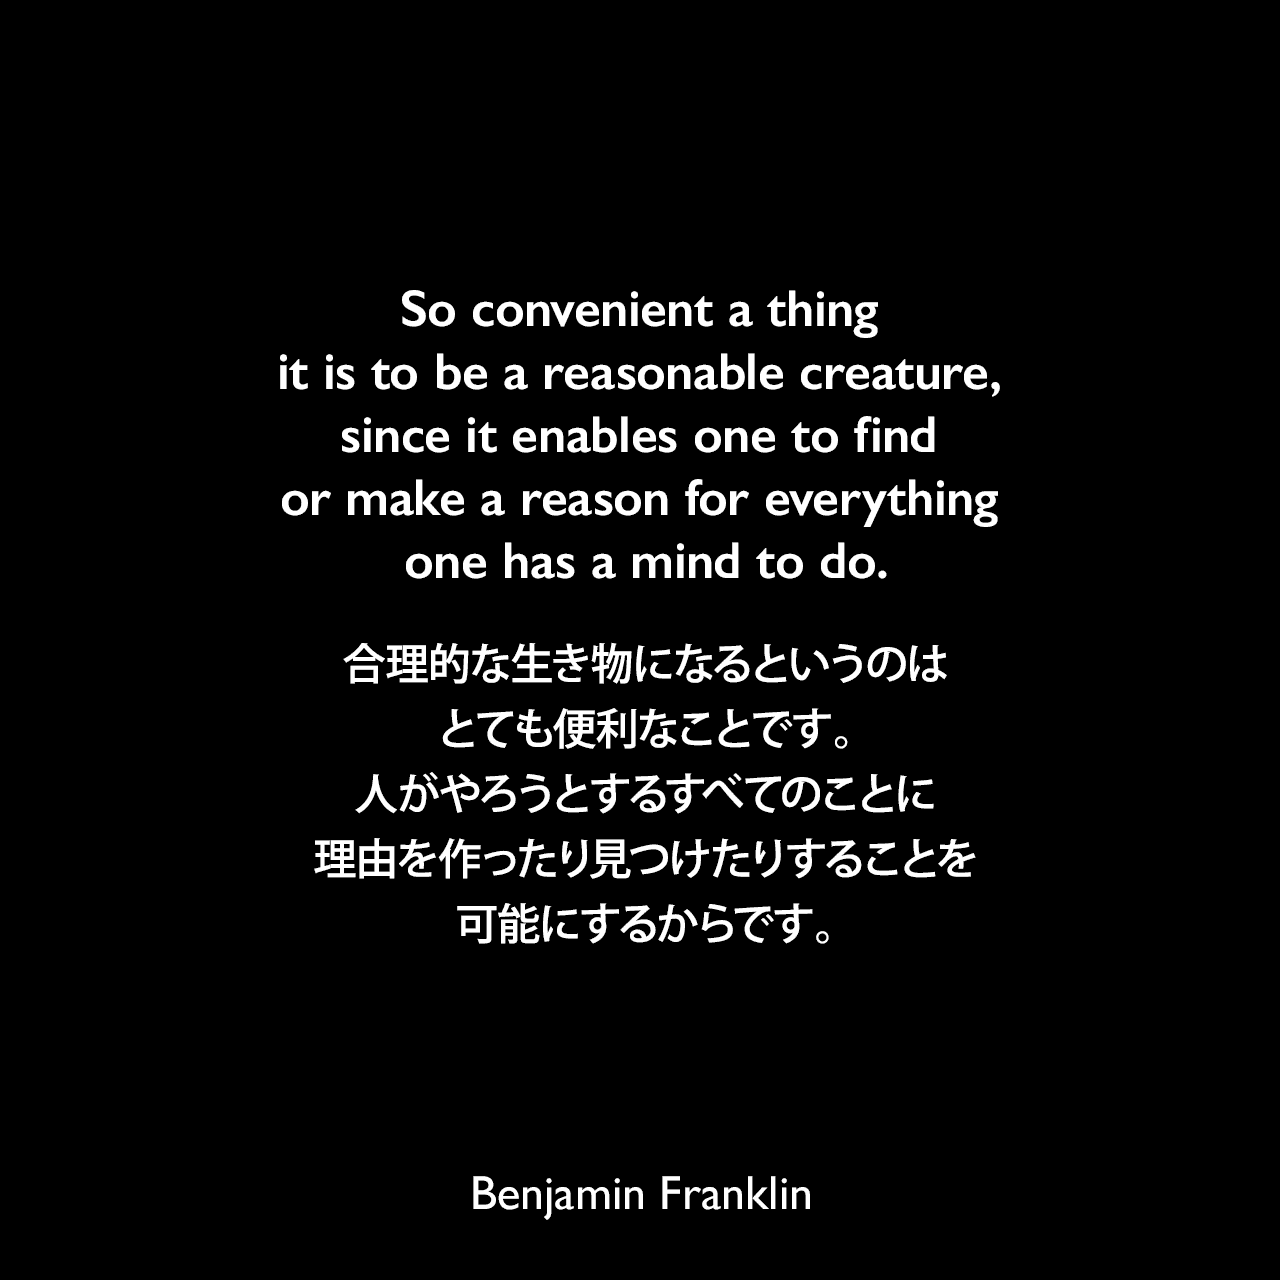 So convenient a thing it is to be a reasonable creature, since it enables one to find or make a reason for everything one has a mind to do.合理的な生き物になるというのはとても便利なことです。人がやろうとするすべてのことに理由を作ったり見つけたりすることを可能にするからです。- ベンジャミン・フランクリンによる本「フランクリン自伝（1791年）」よりBenjamin Franklin